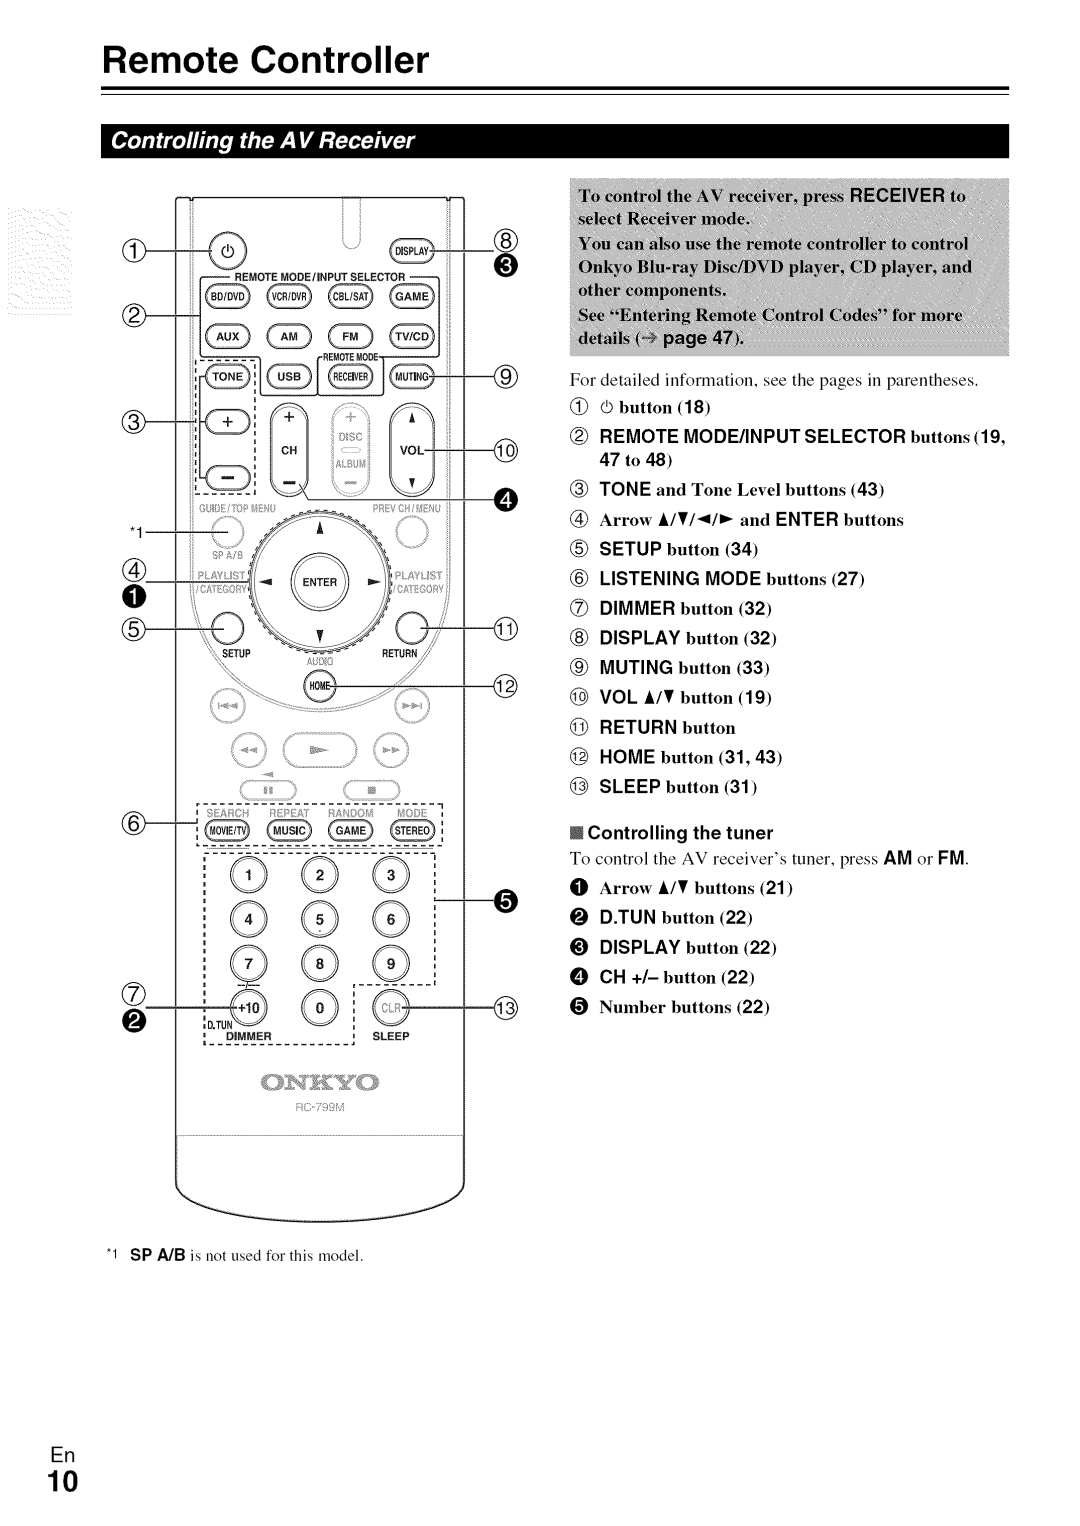 Onkyo HT-R590 Remote Controller, @@ @ @, ___@, _ REMOTE MODE/INPUT SELECTOR buttons19 47 to, I Controlling the tuner 